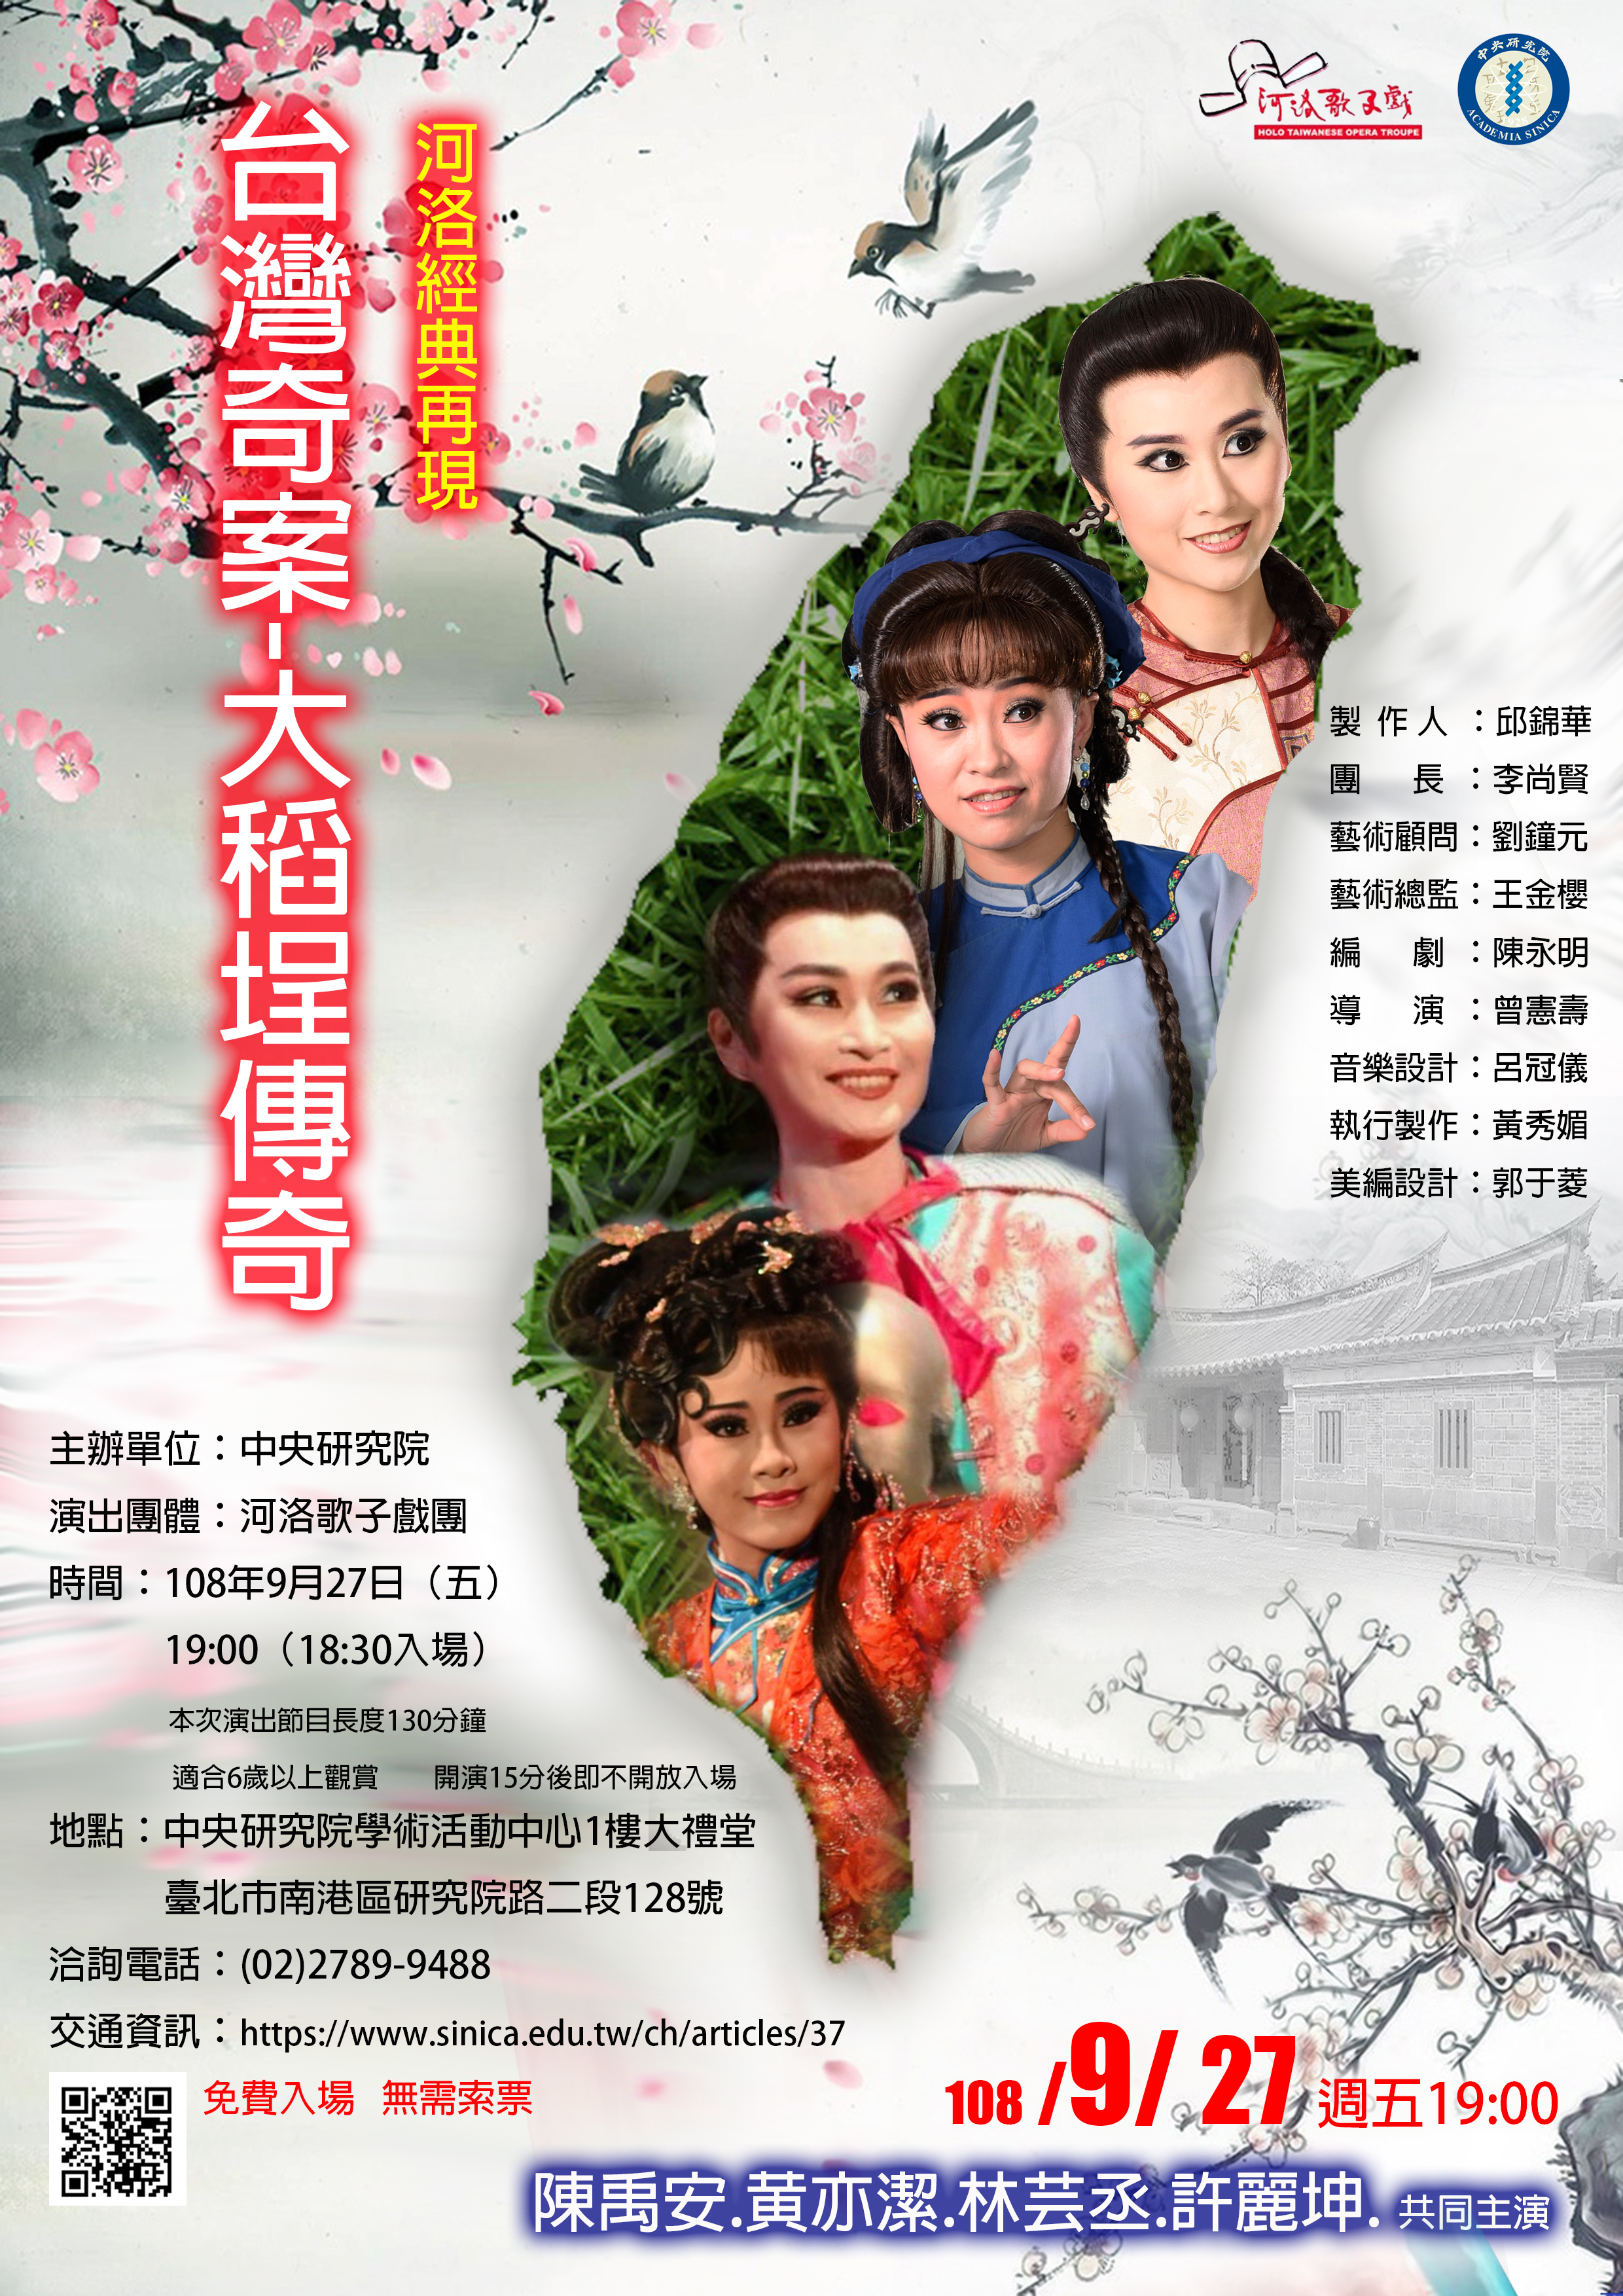 2019 Artistic Event: The Taiwanese Tale &#8220;Legend of Dadaocheng&#8221;